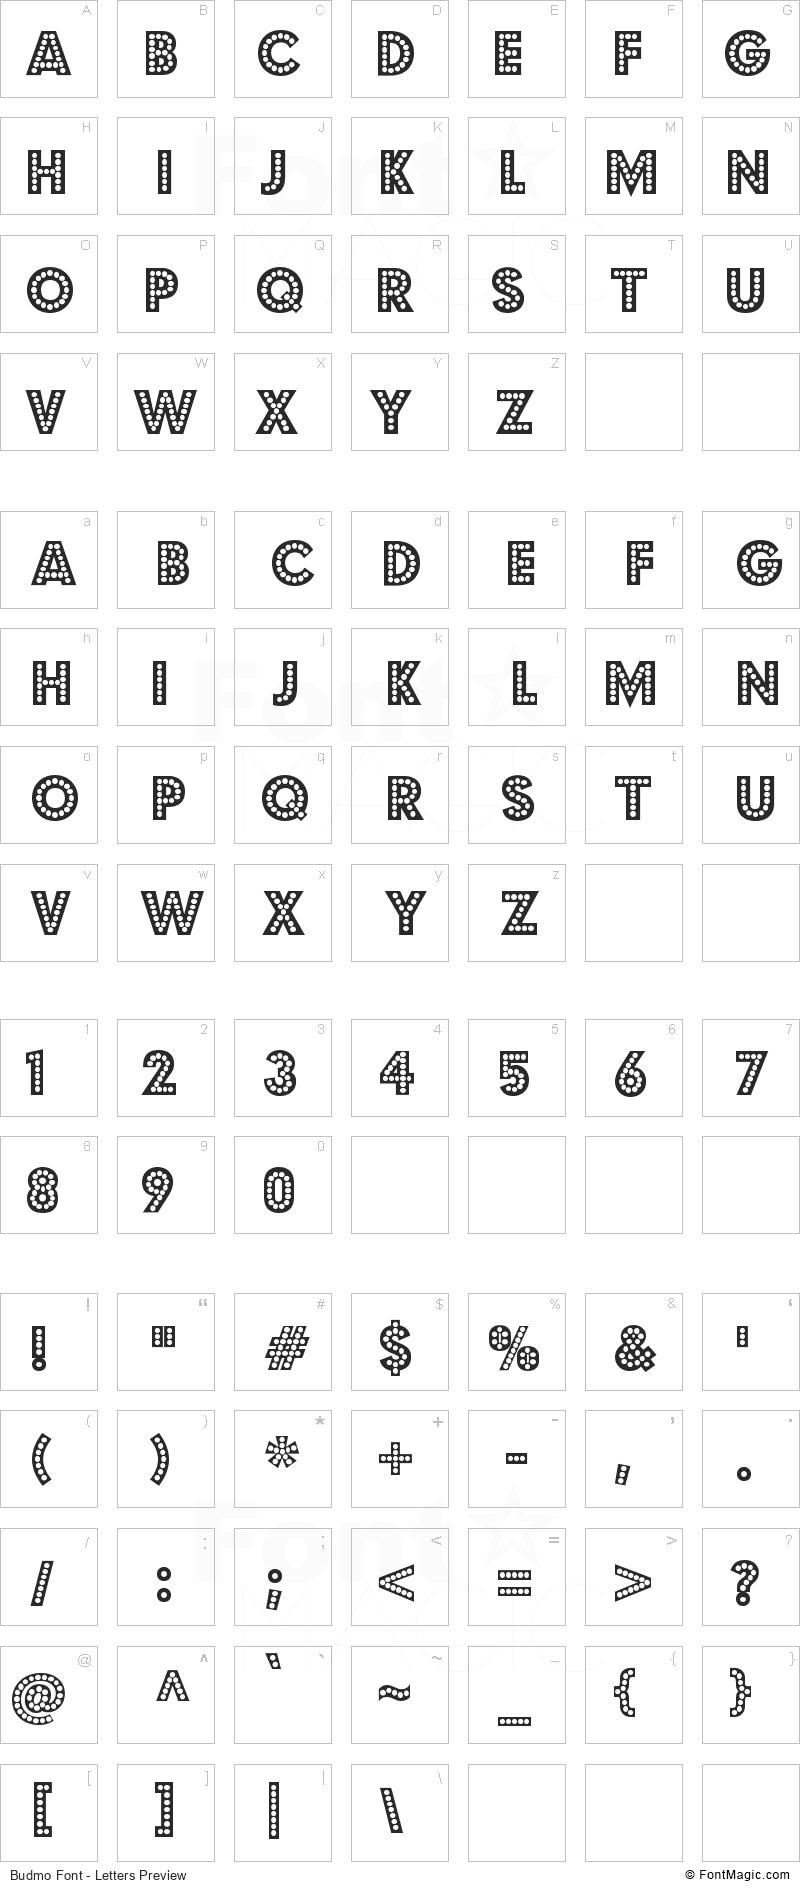 Budmo Font - All Latters Preview Chart